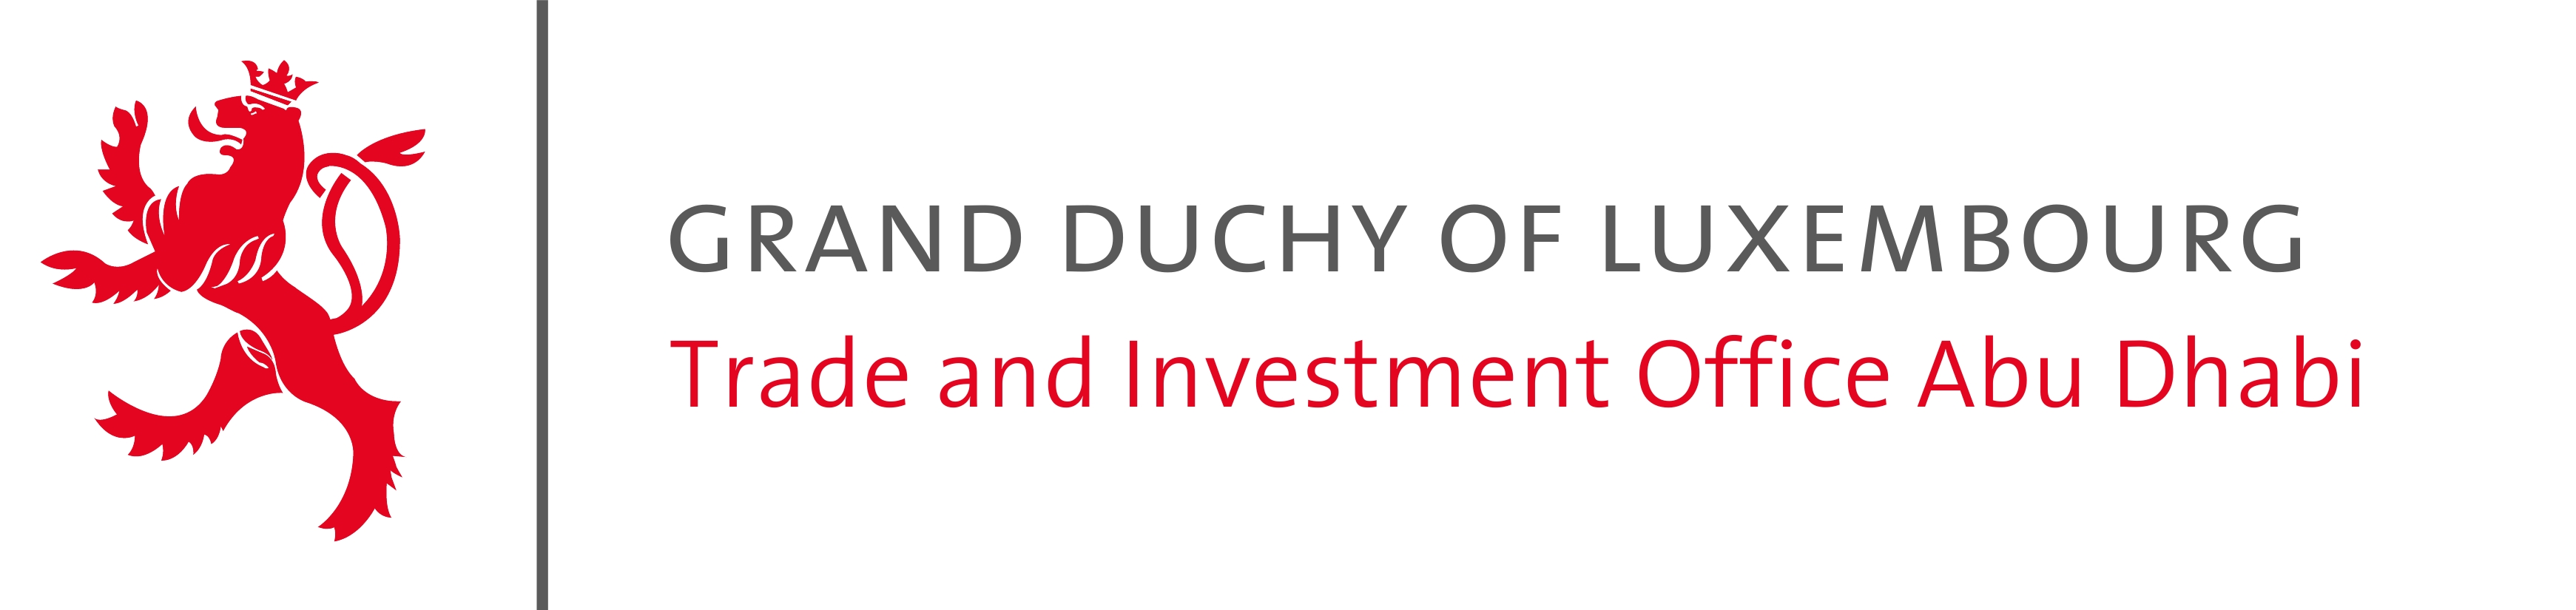 Luxembourg Trade and Investment Office - Abu Dhabi